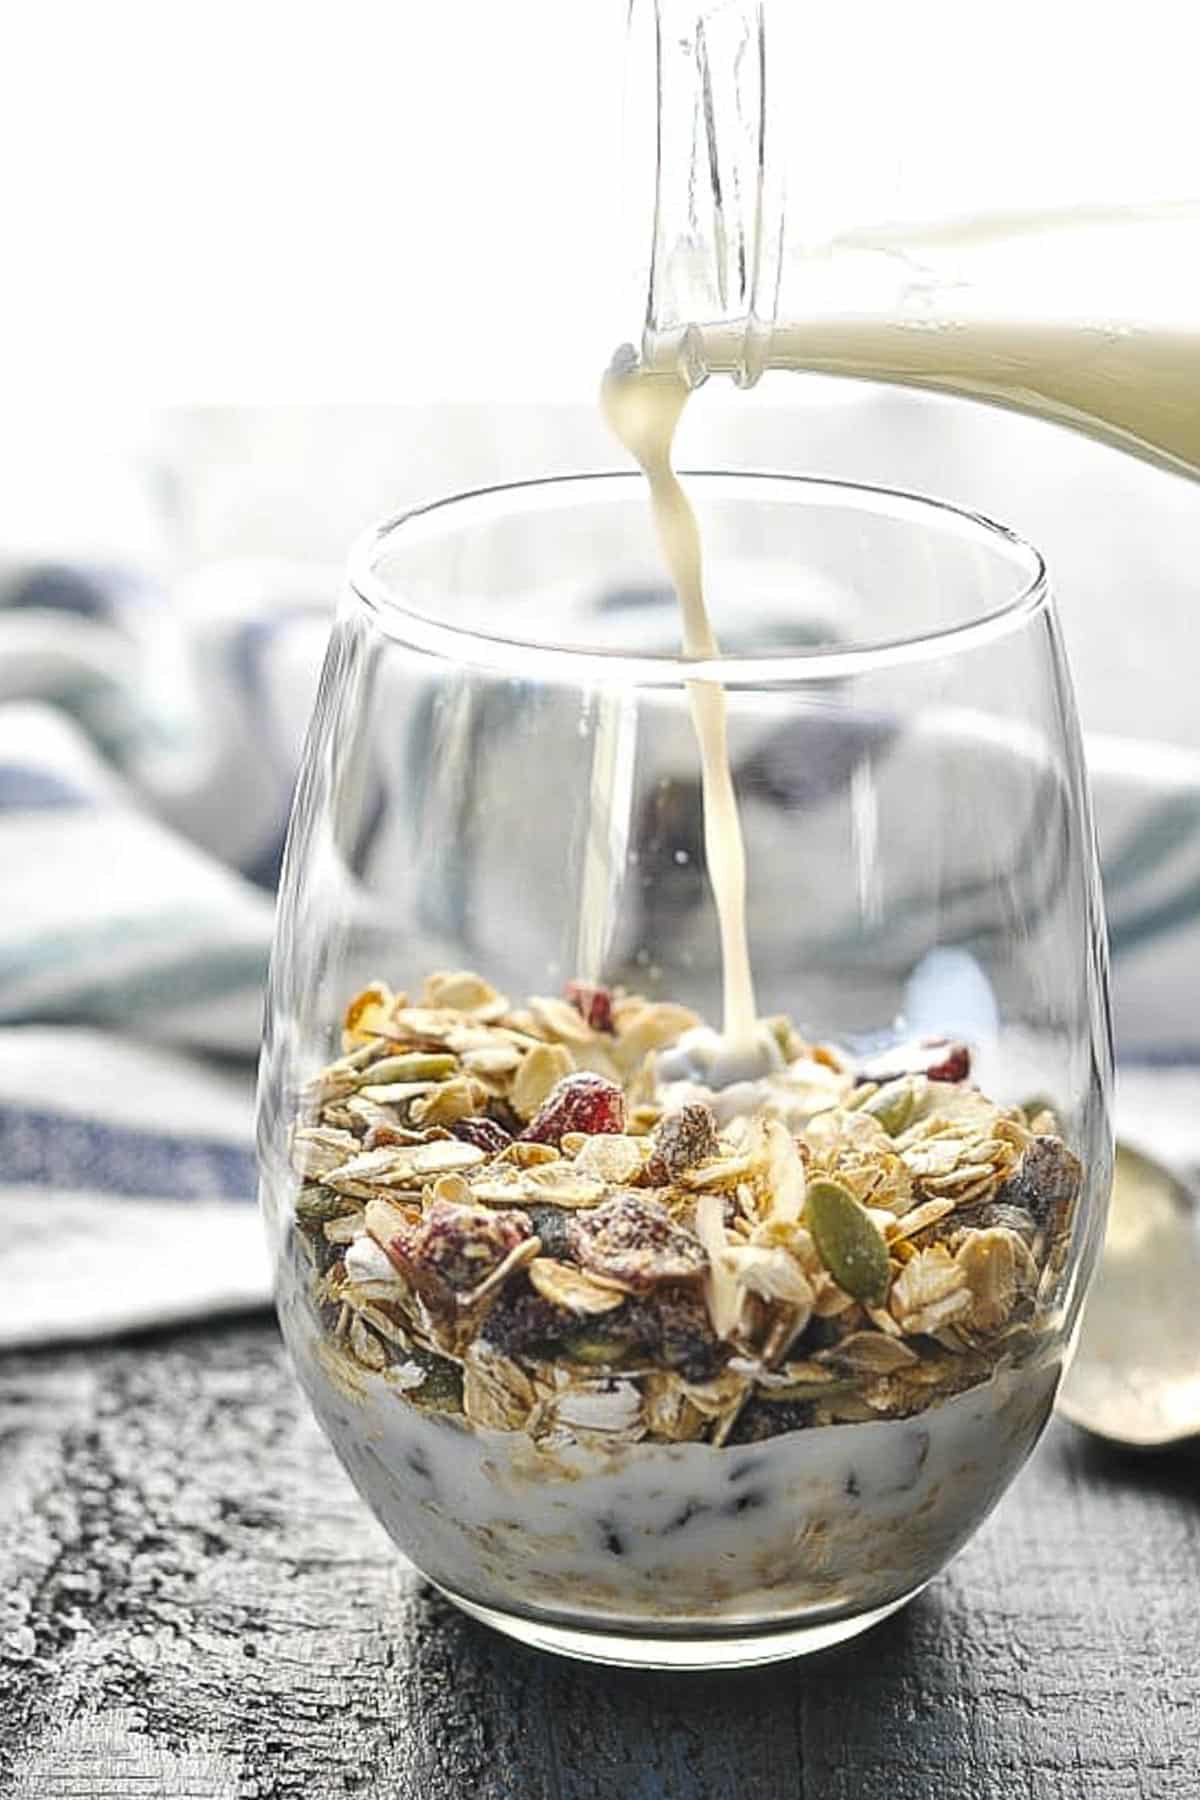 Pouring milk into a glass of the best homemade muesli recipe.